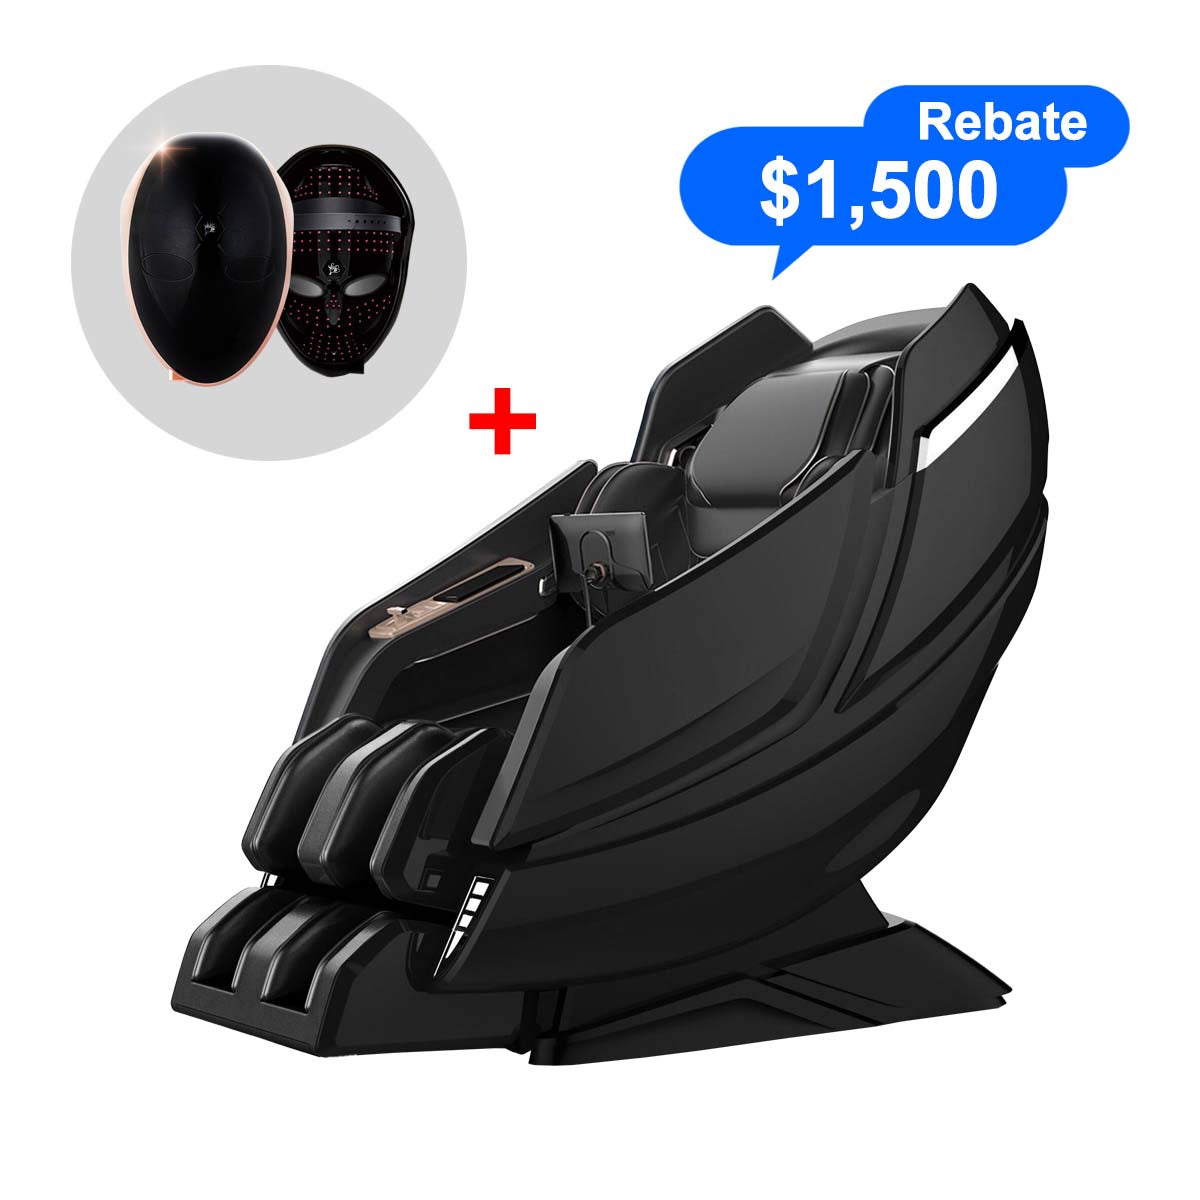 [Free Gift:Premium LED Mask] [Pre-Order 7-27-2024] Dios Massage Chair <font color=red>6D</font> Dual Air Tech Touch Roller SL-track:Dios-1288